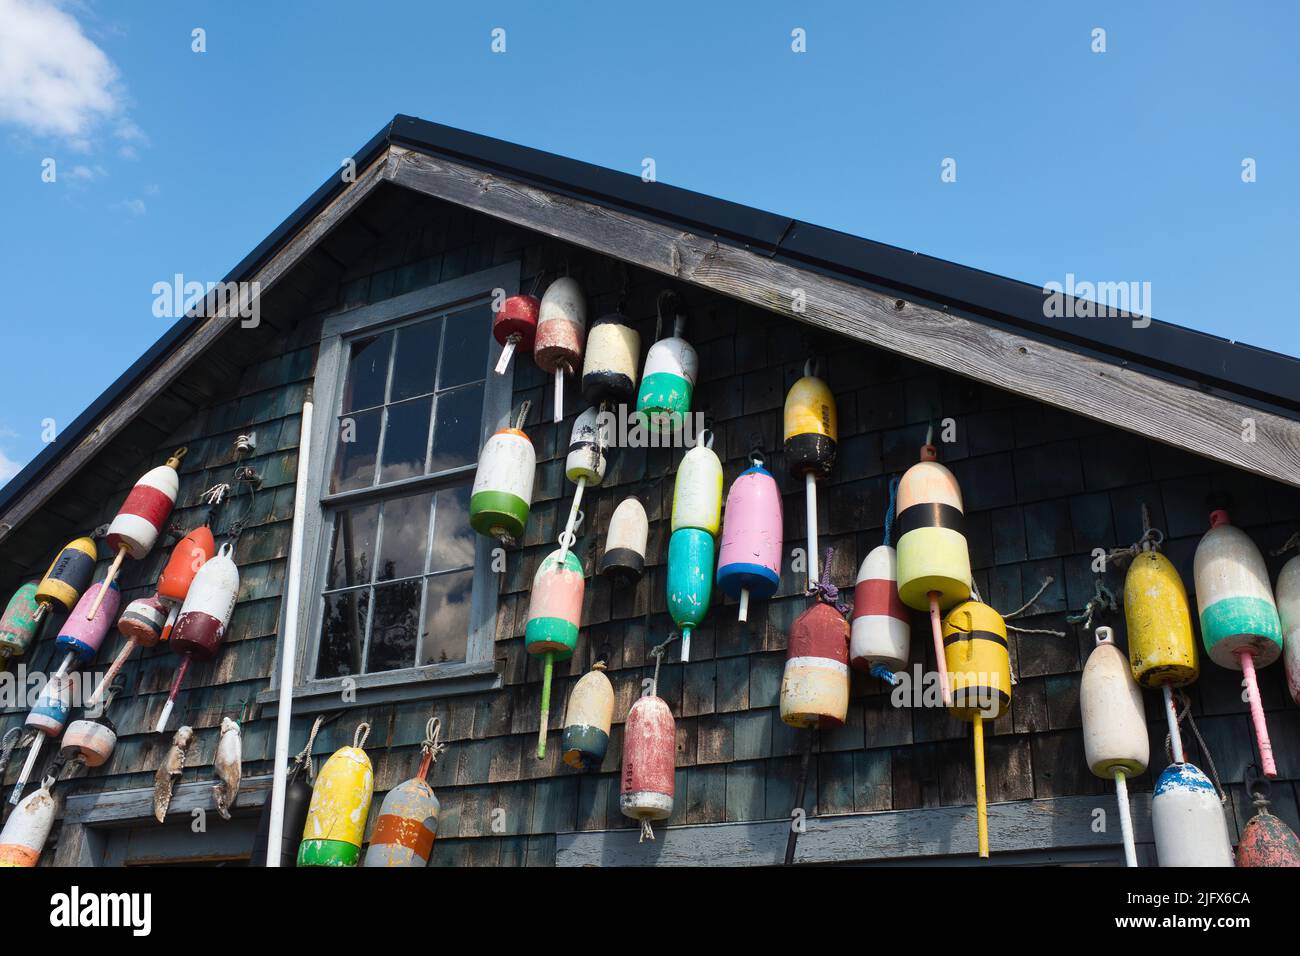 Lobster Trap Buoys hanging on side of Rustic Building Stock Photo